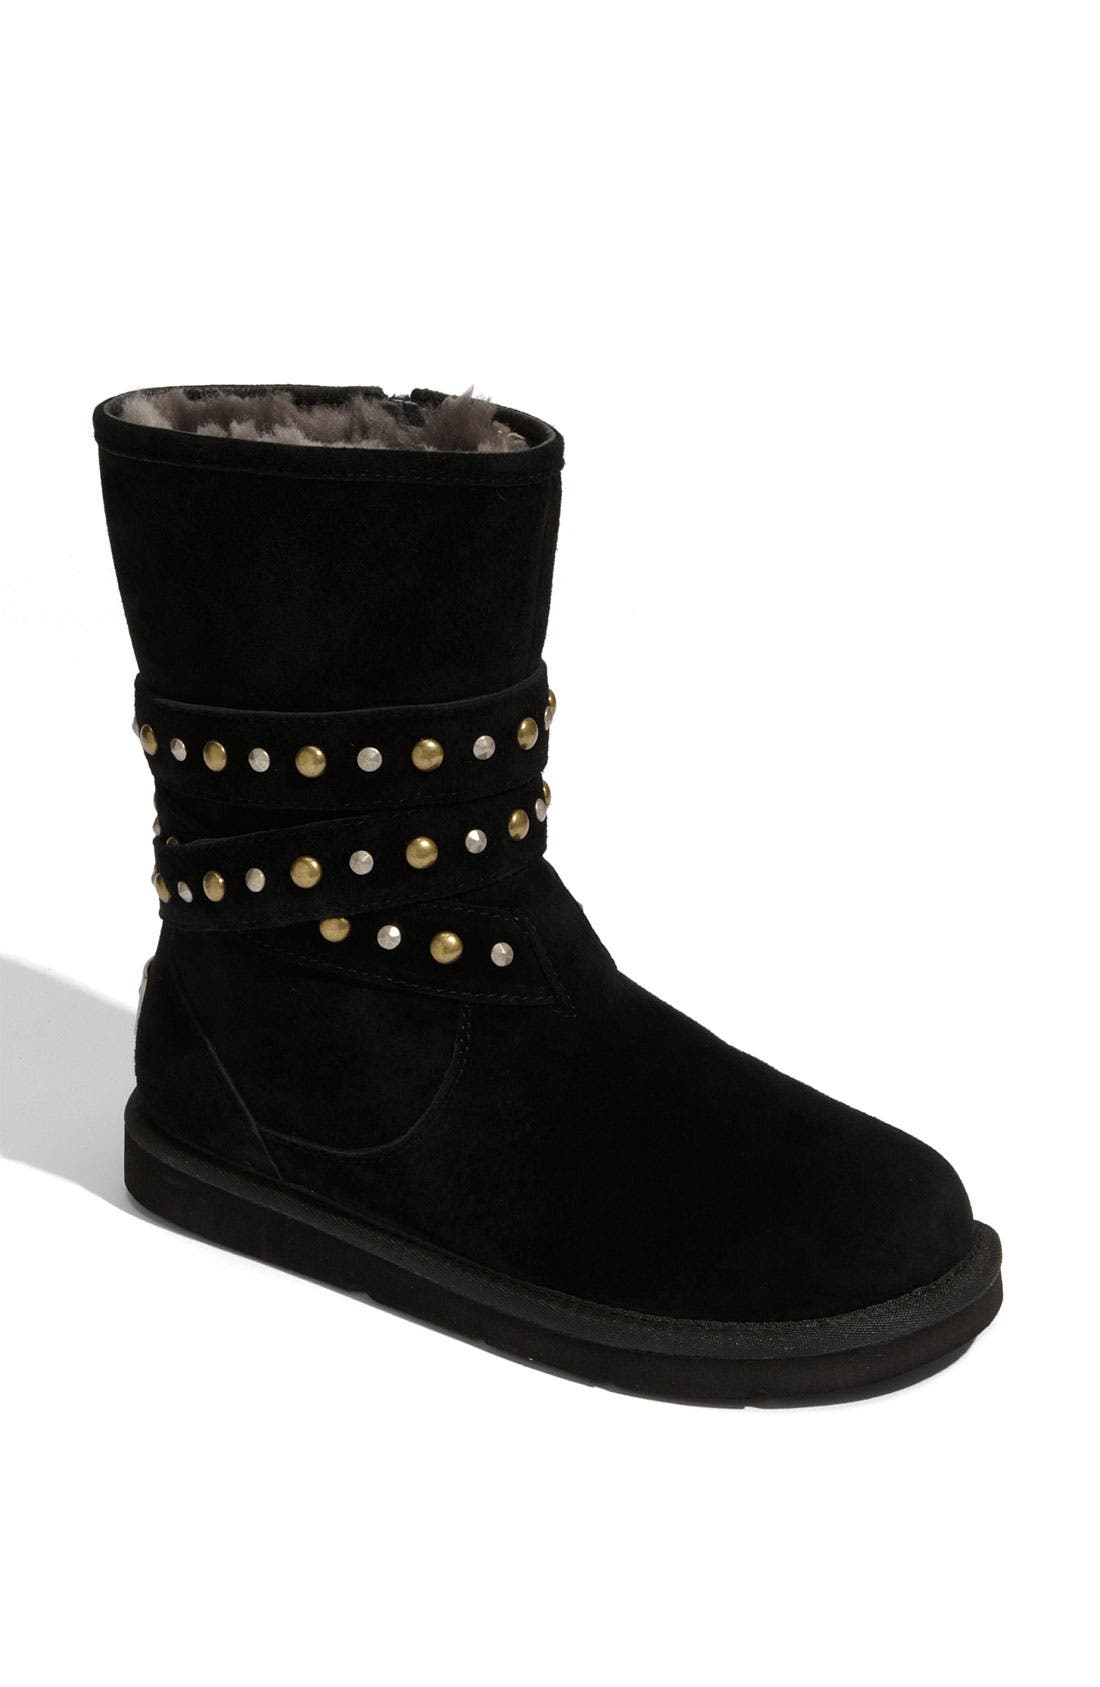 best ugg boots for snow